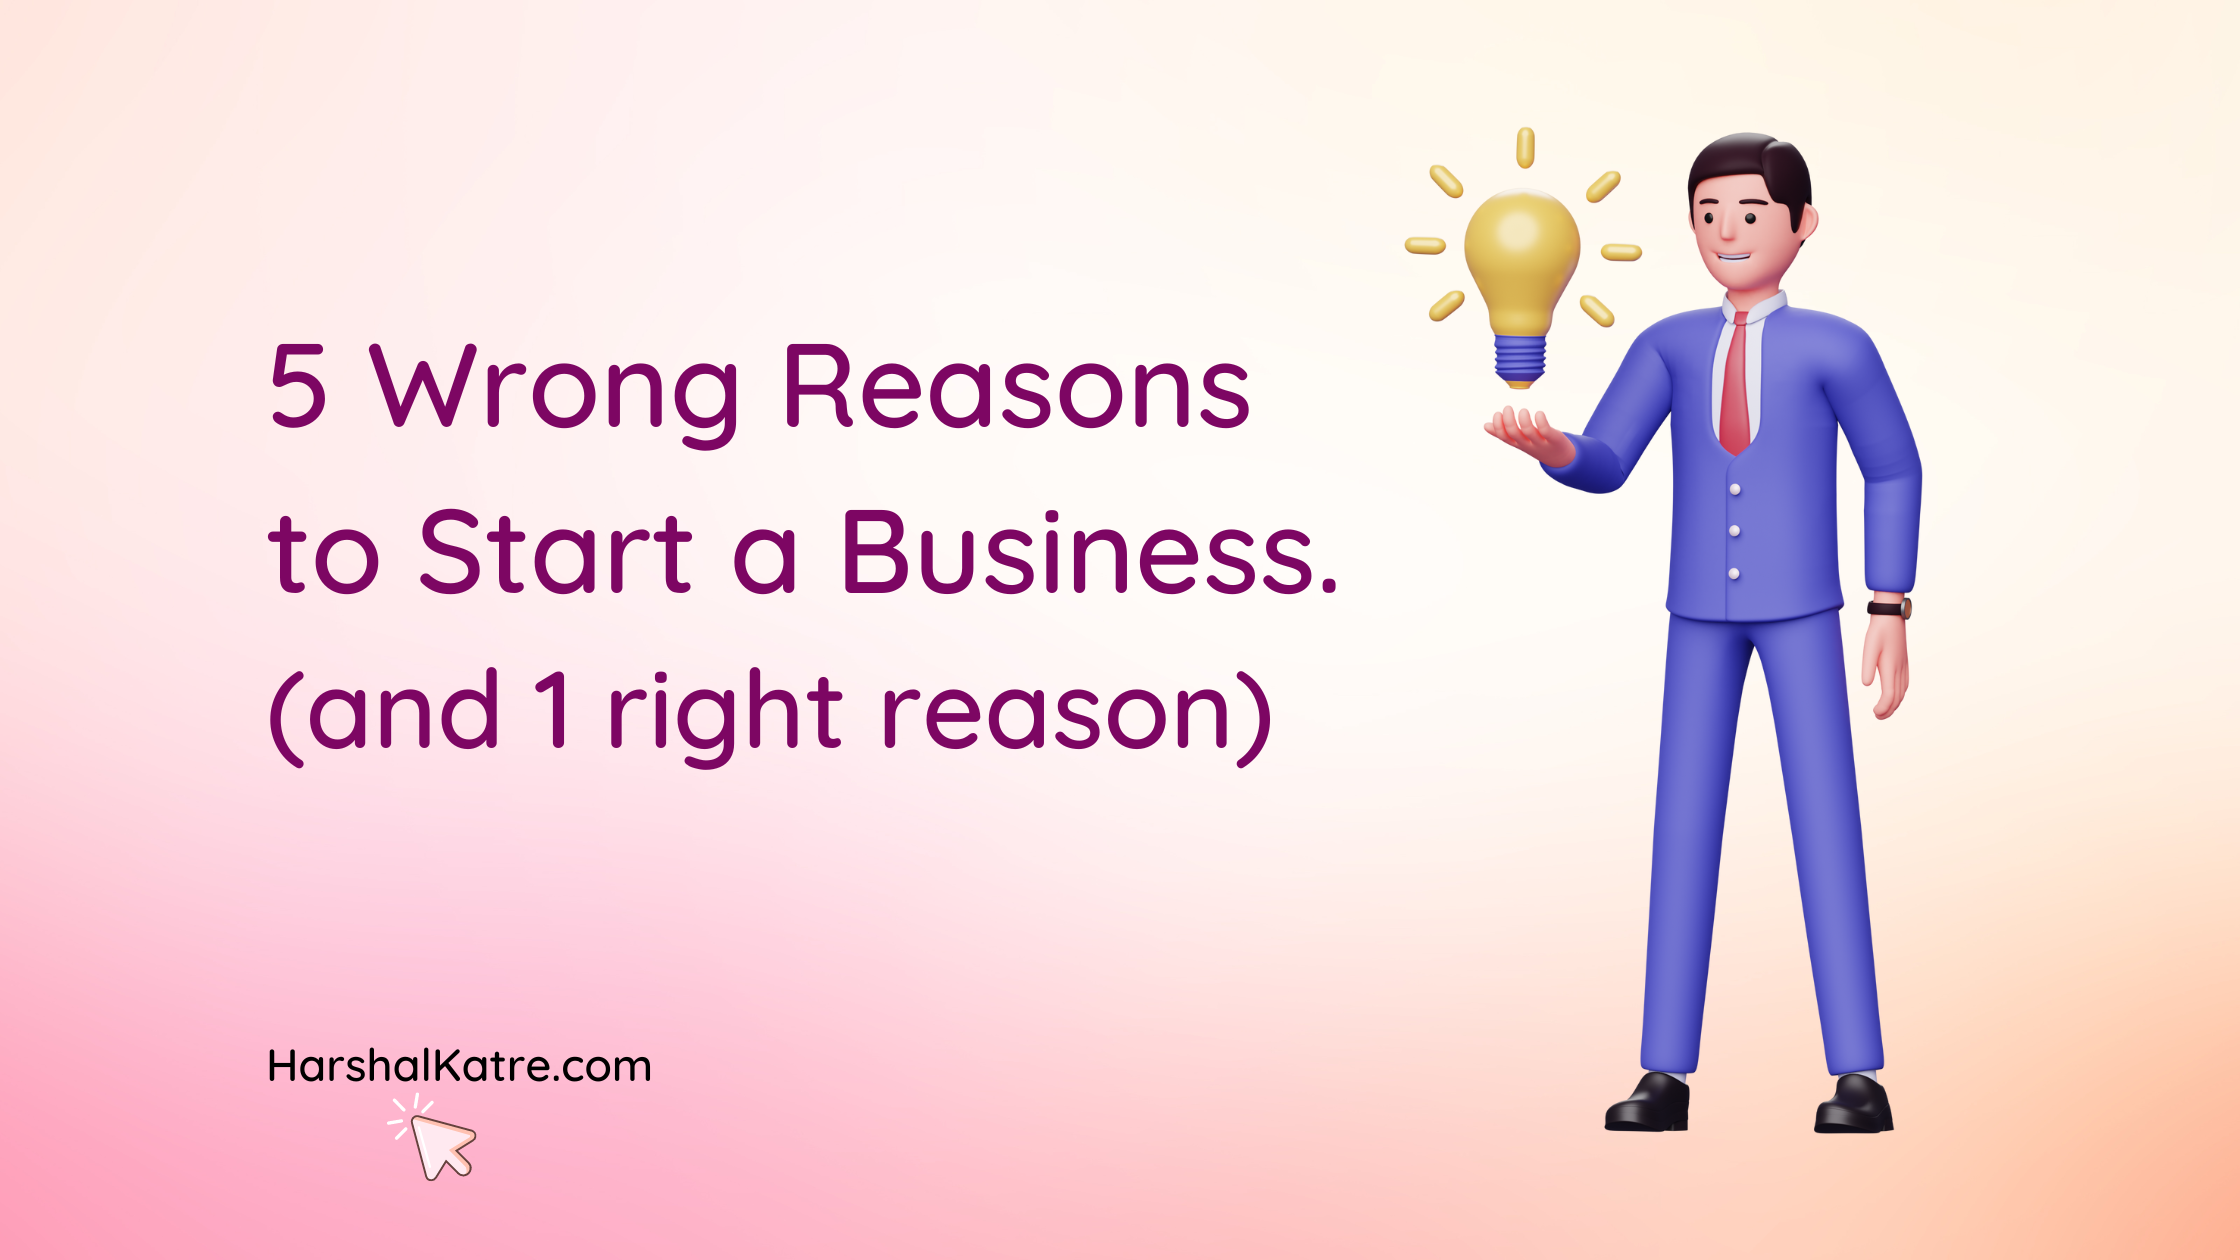 Wrong reasons to start a business